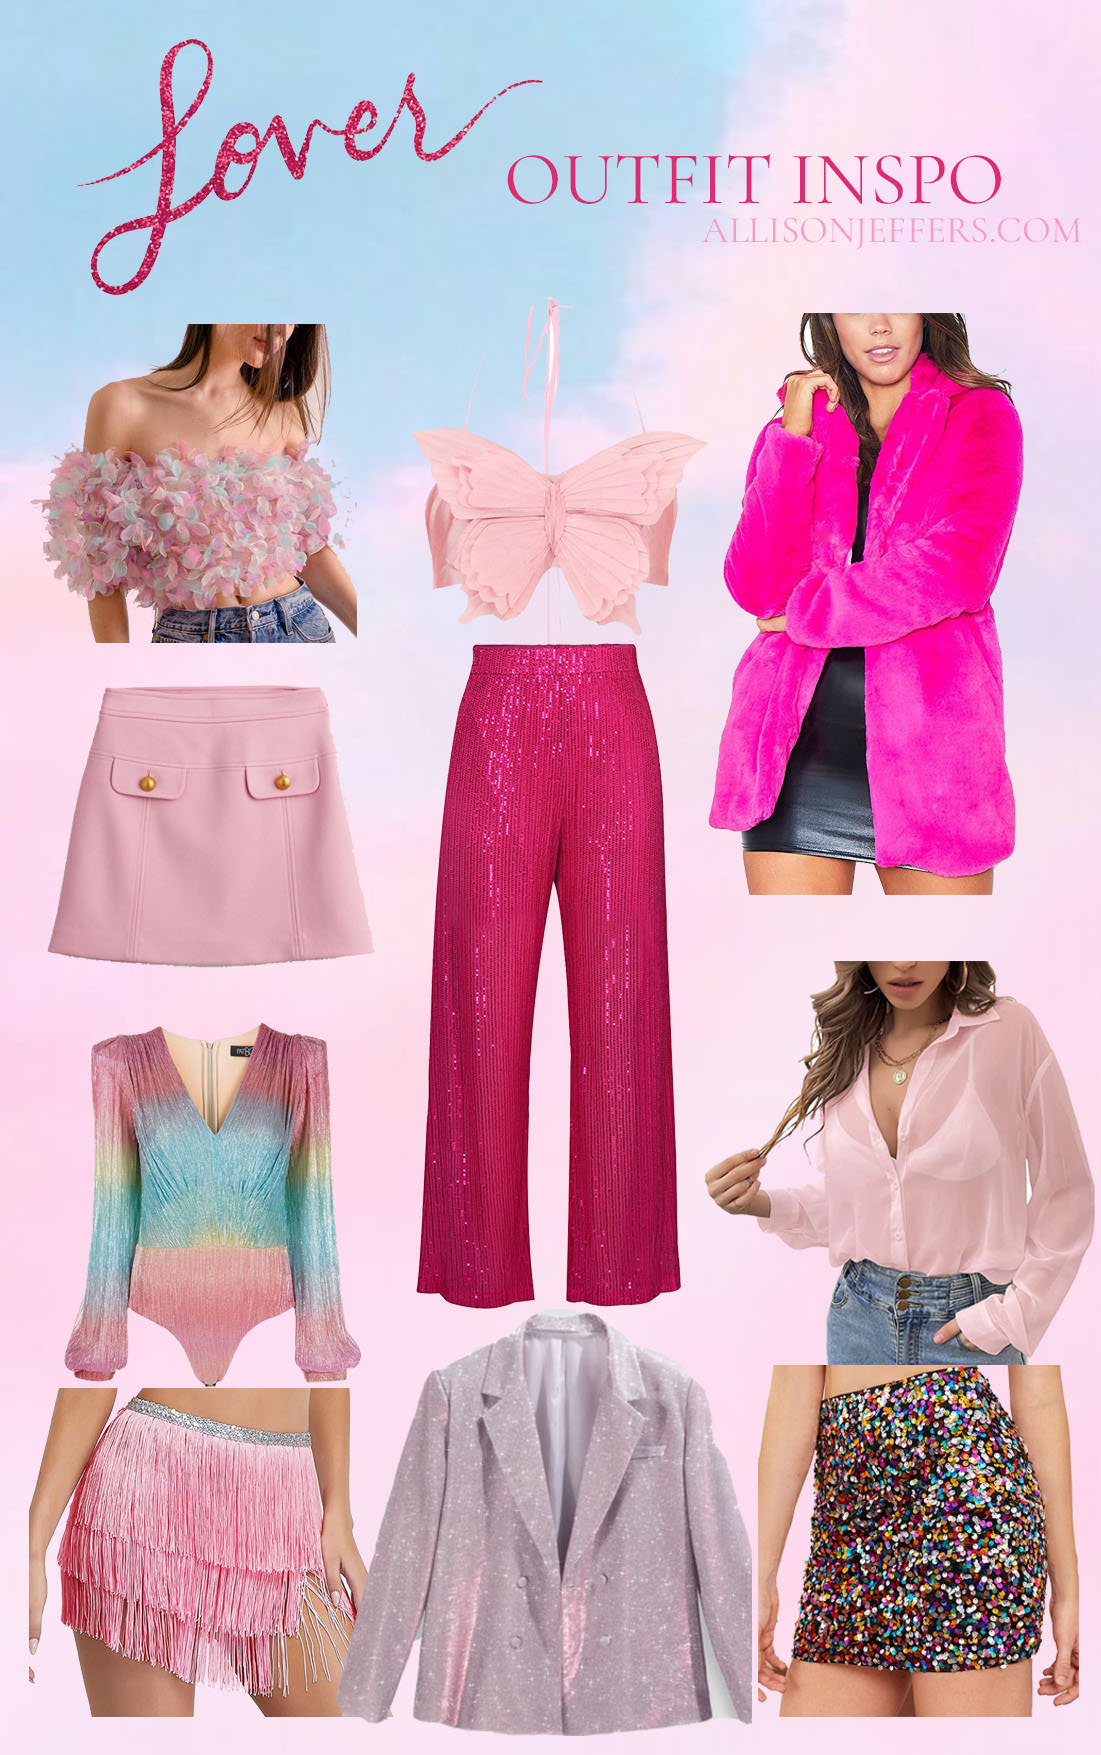 taylor swift eras tour LOVER outfit INSPIRATION IDEAS